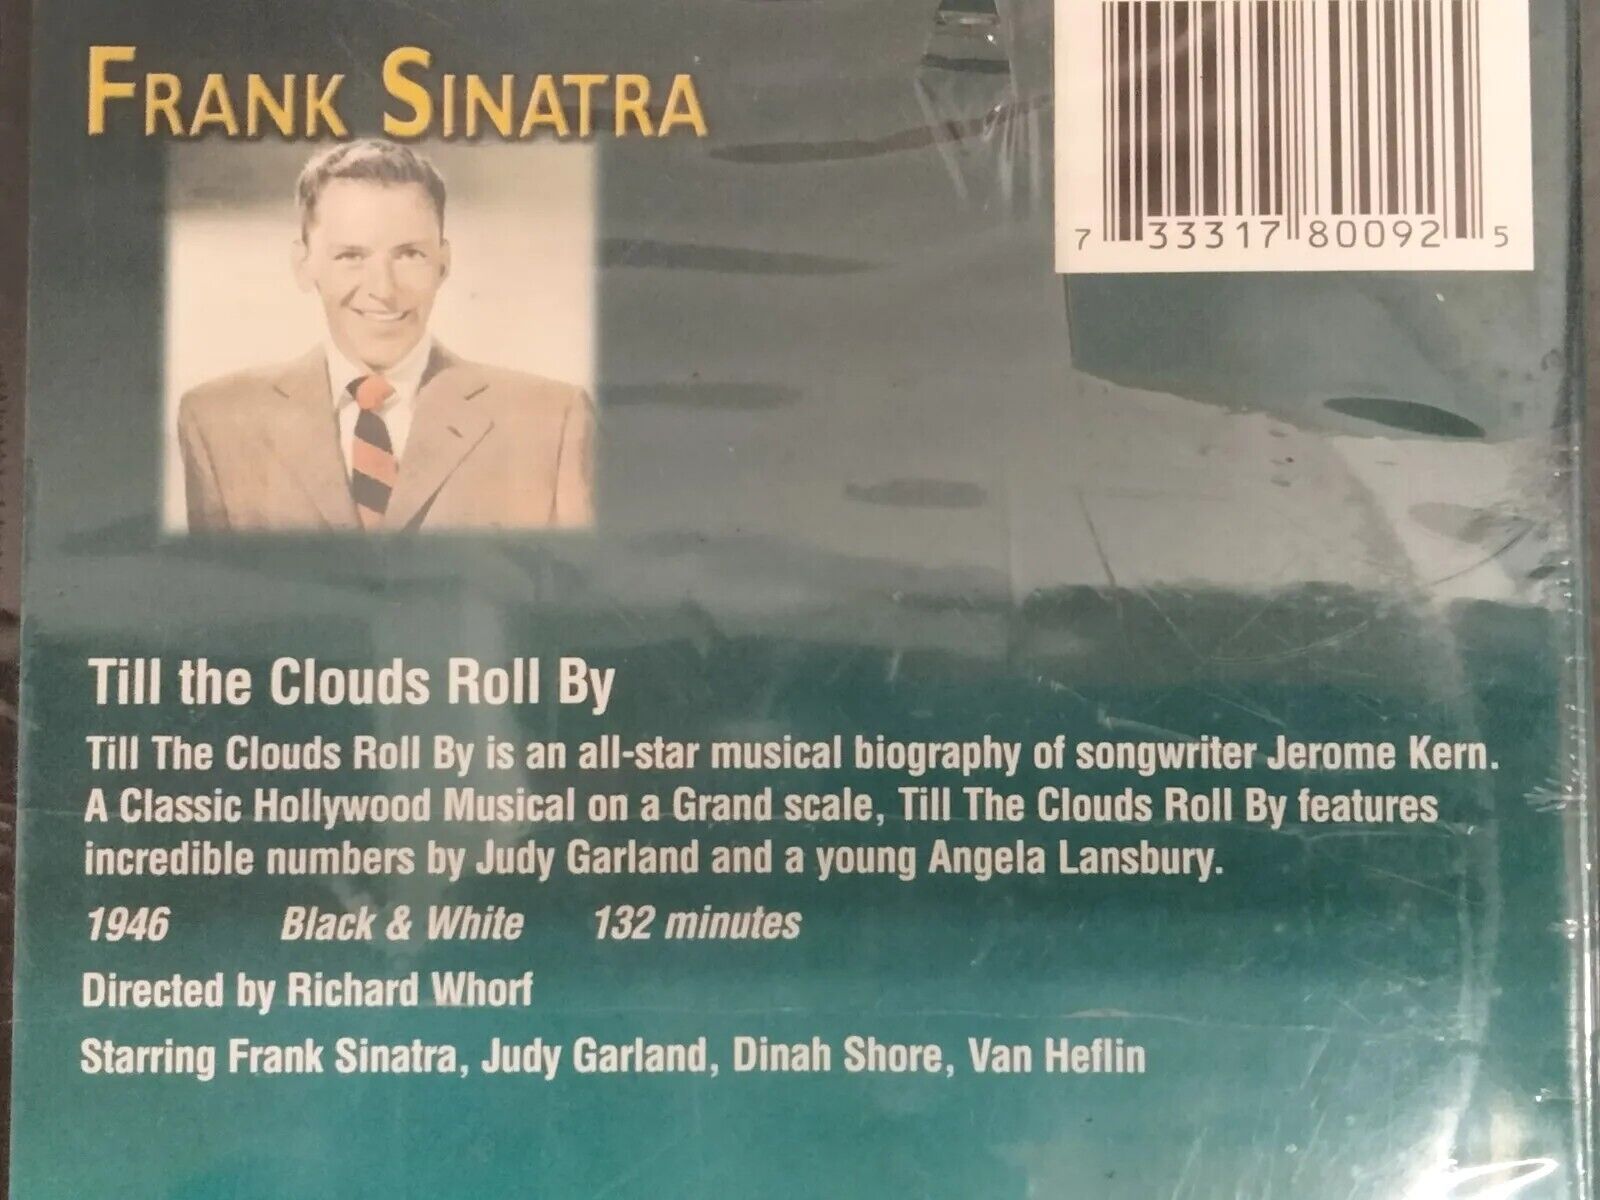 *FRANK SINATRA* Till the Clouds Roll By (DVD, 2004) Jerome Kern Musical Biopic